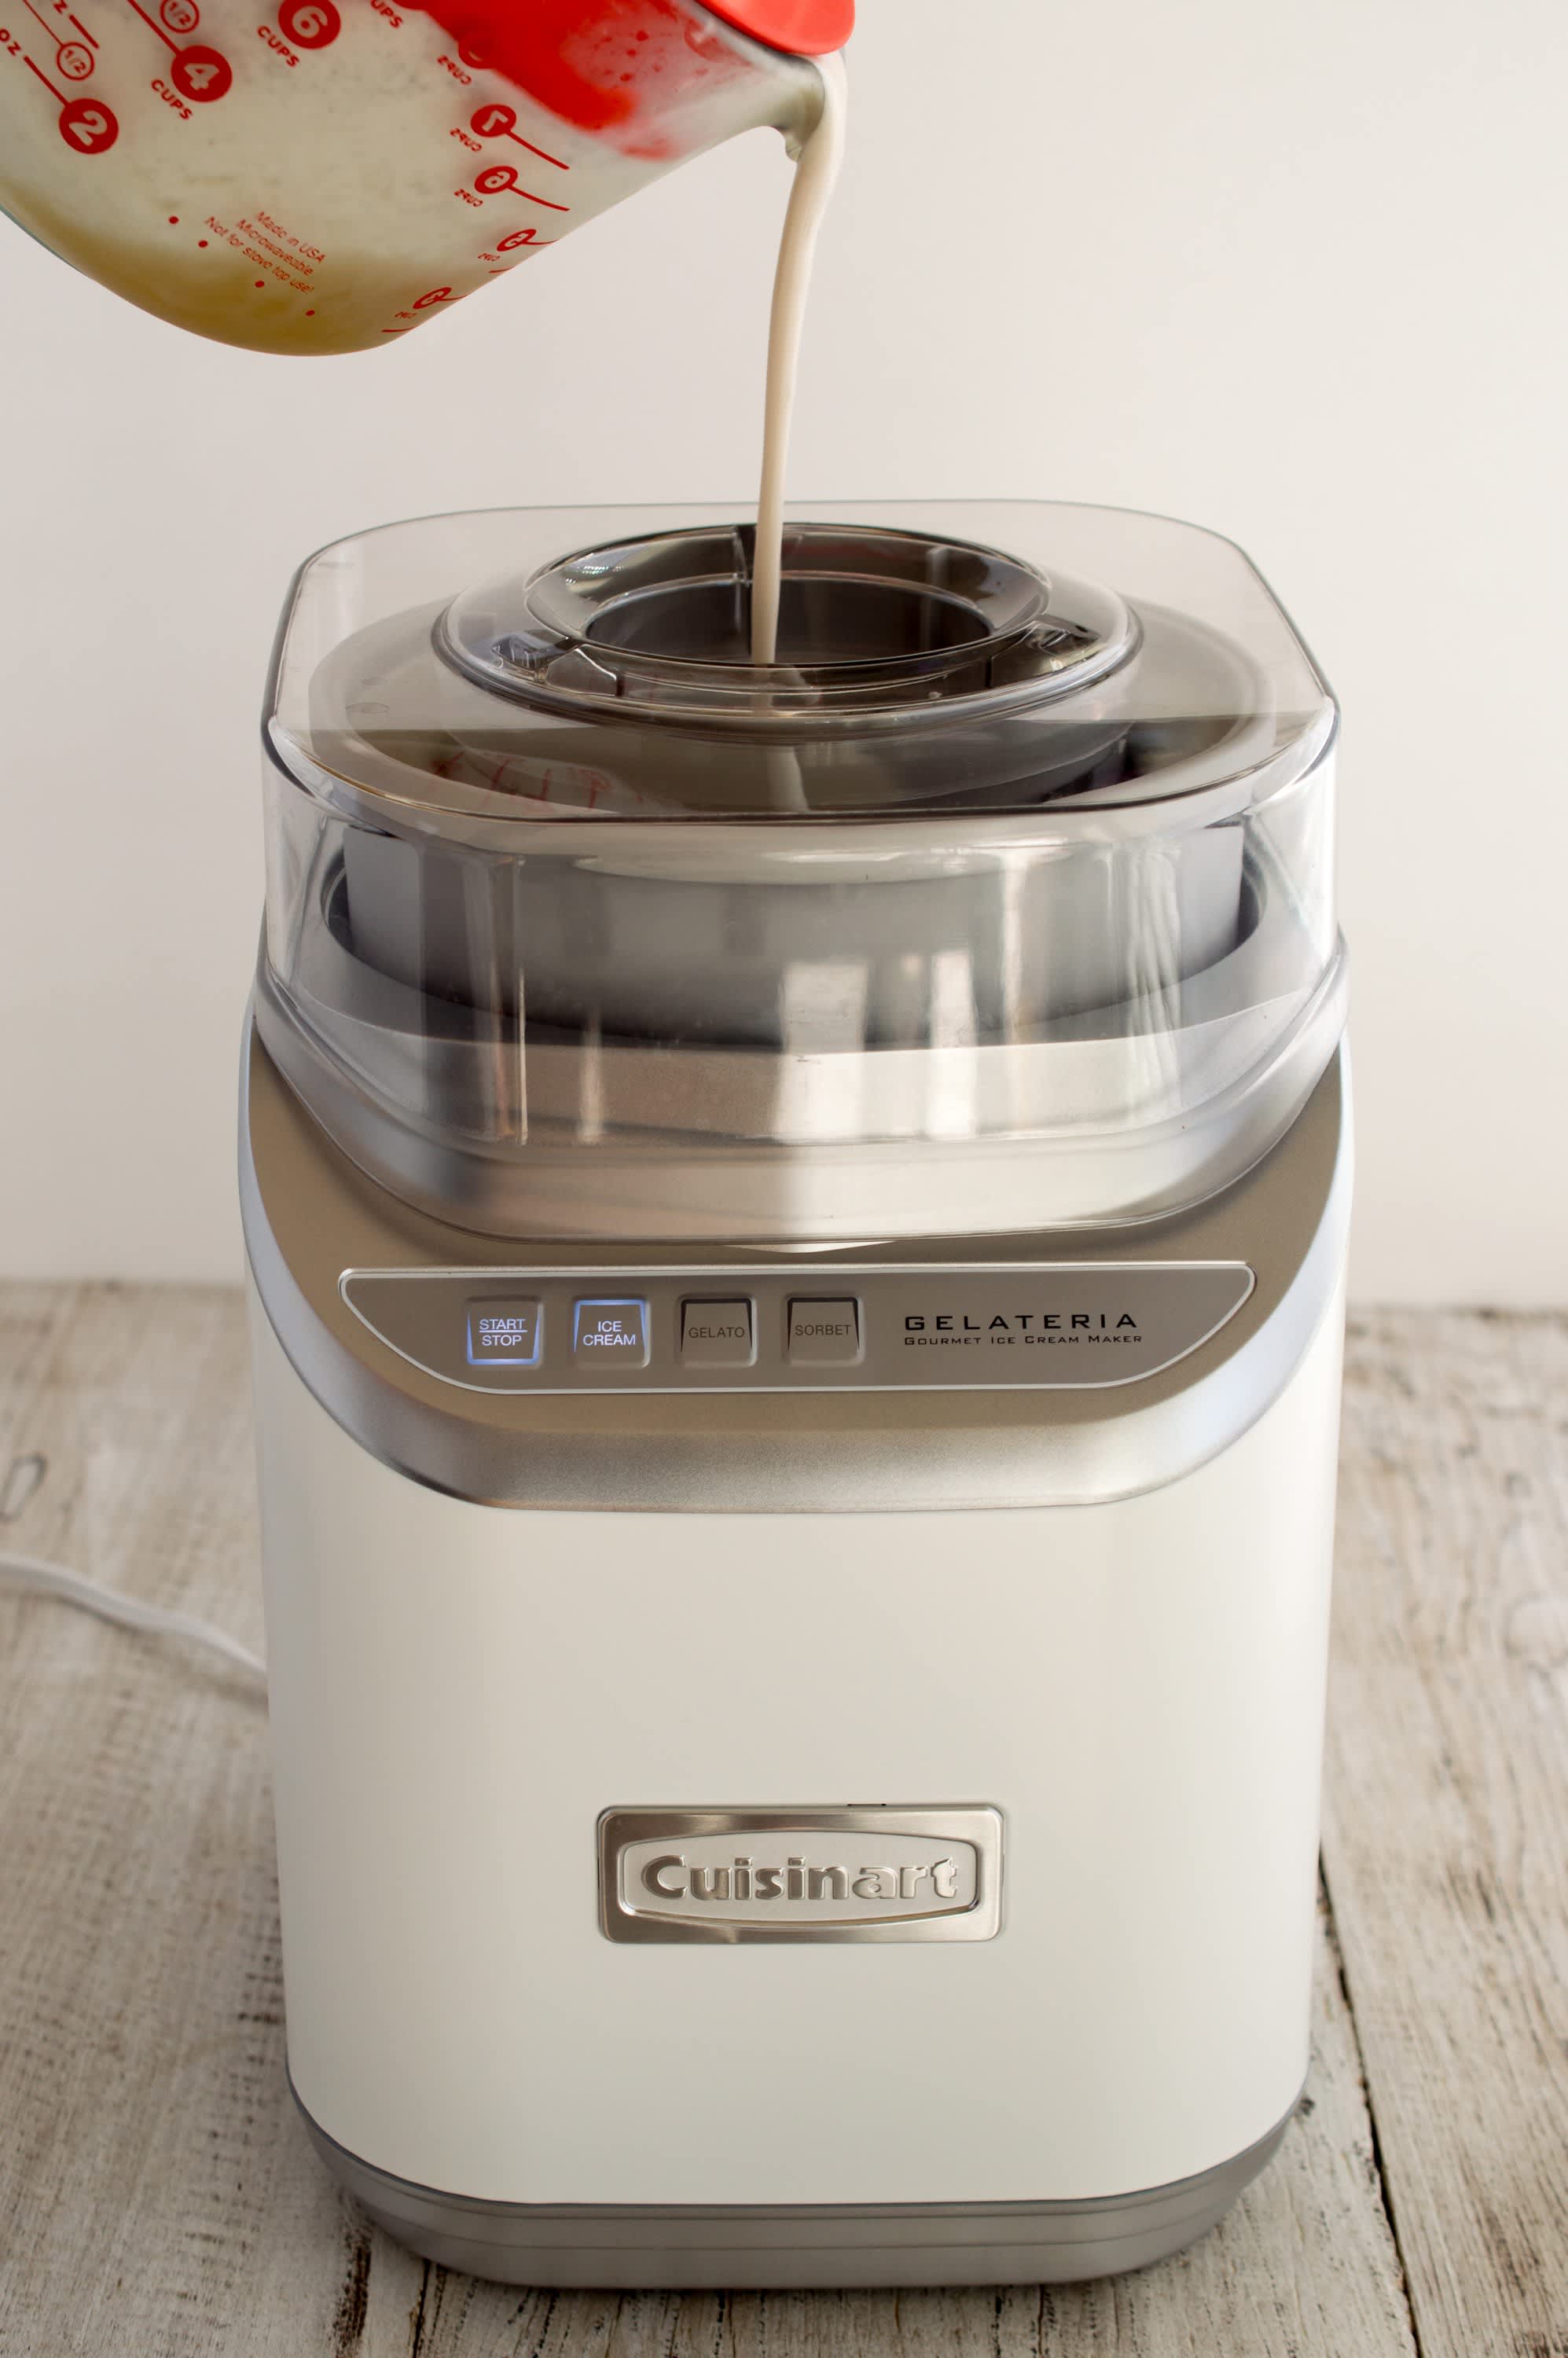 We Reviewed the Cuisinart Gelateria Ice Cream Maker (and Suddenly Became Very Popular) | Kitchn